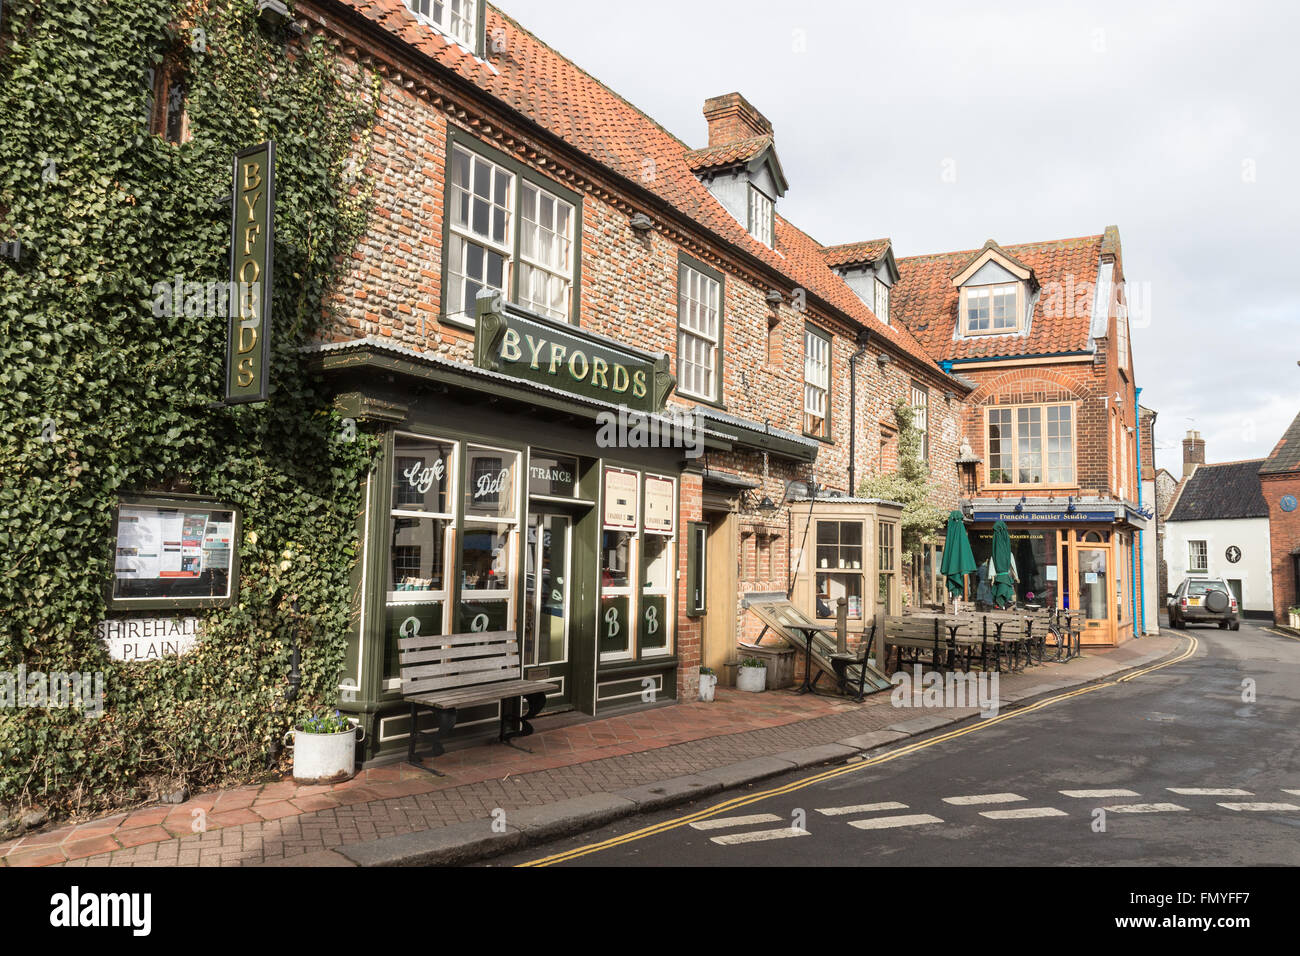 Holt, Norfolk on a Sunday in March 2016 Stock Photo